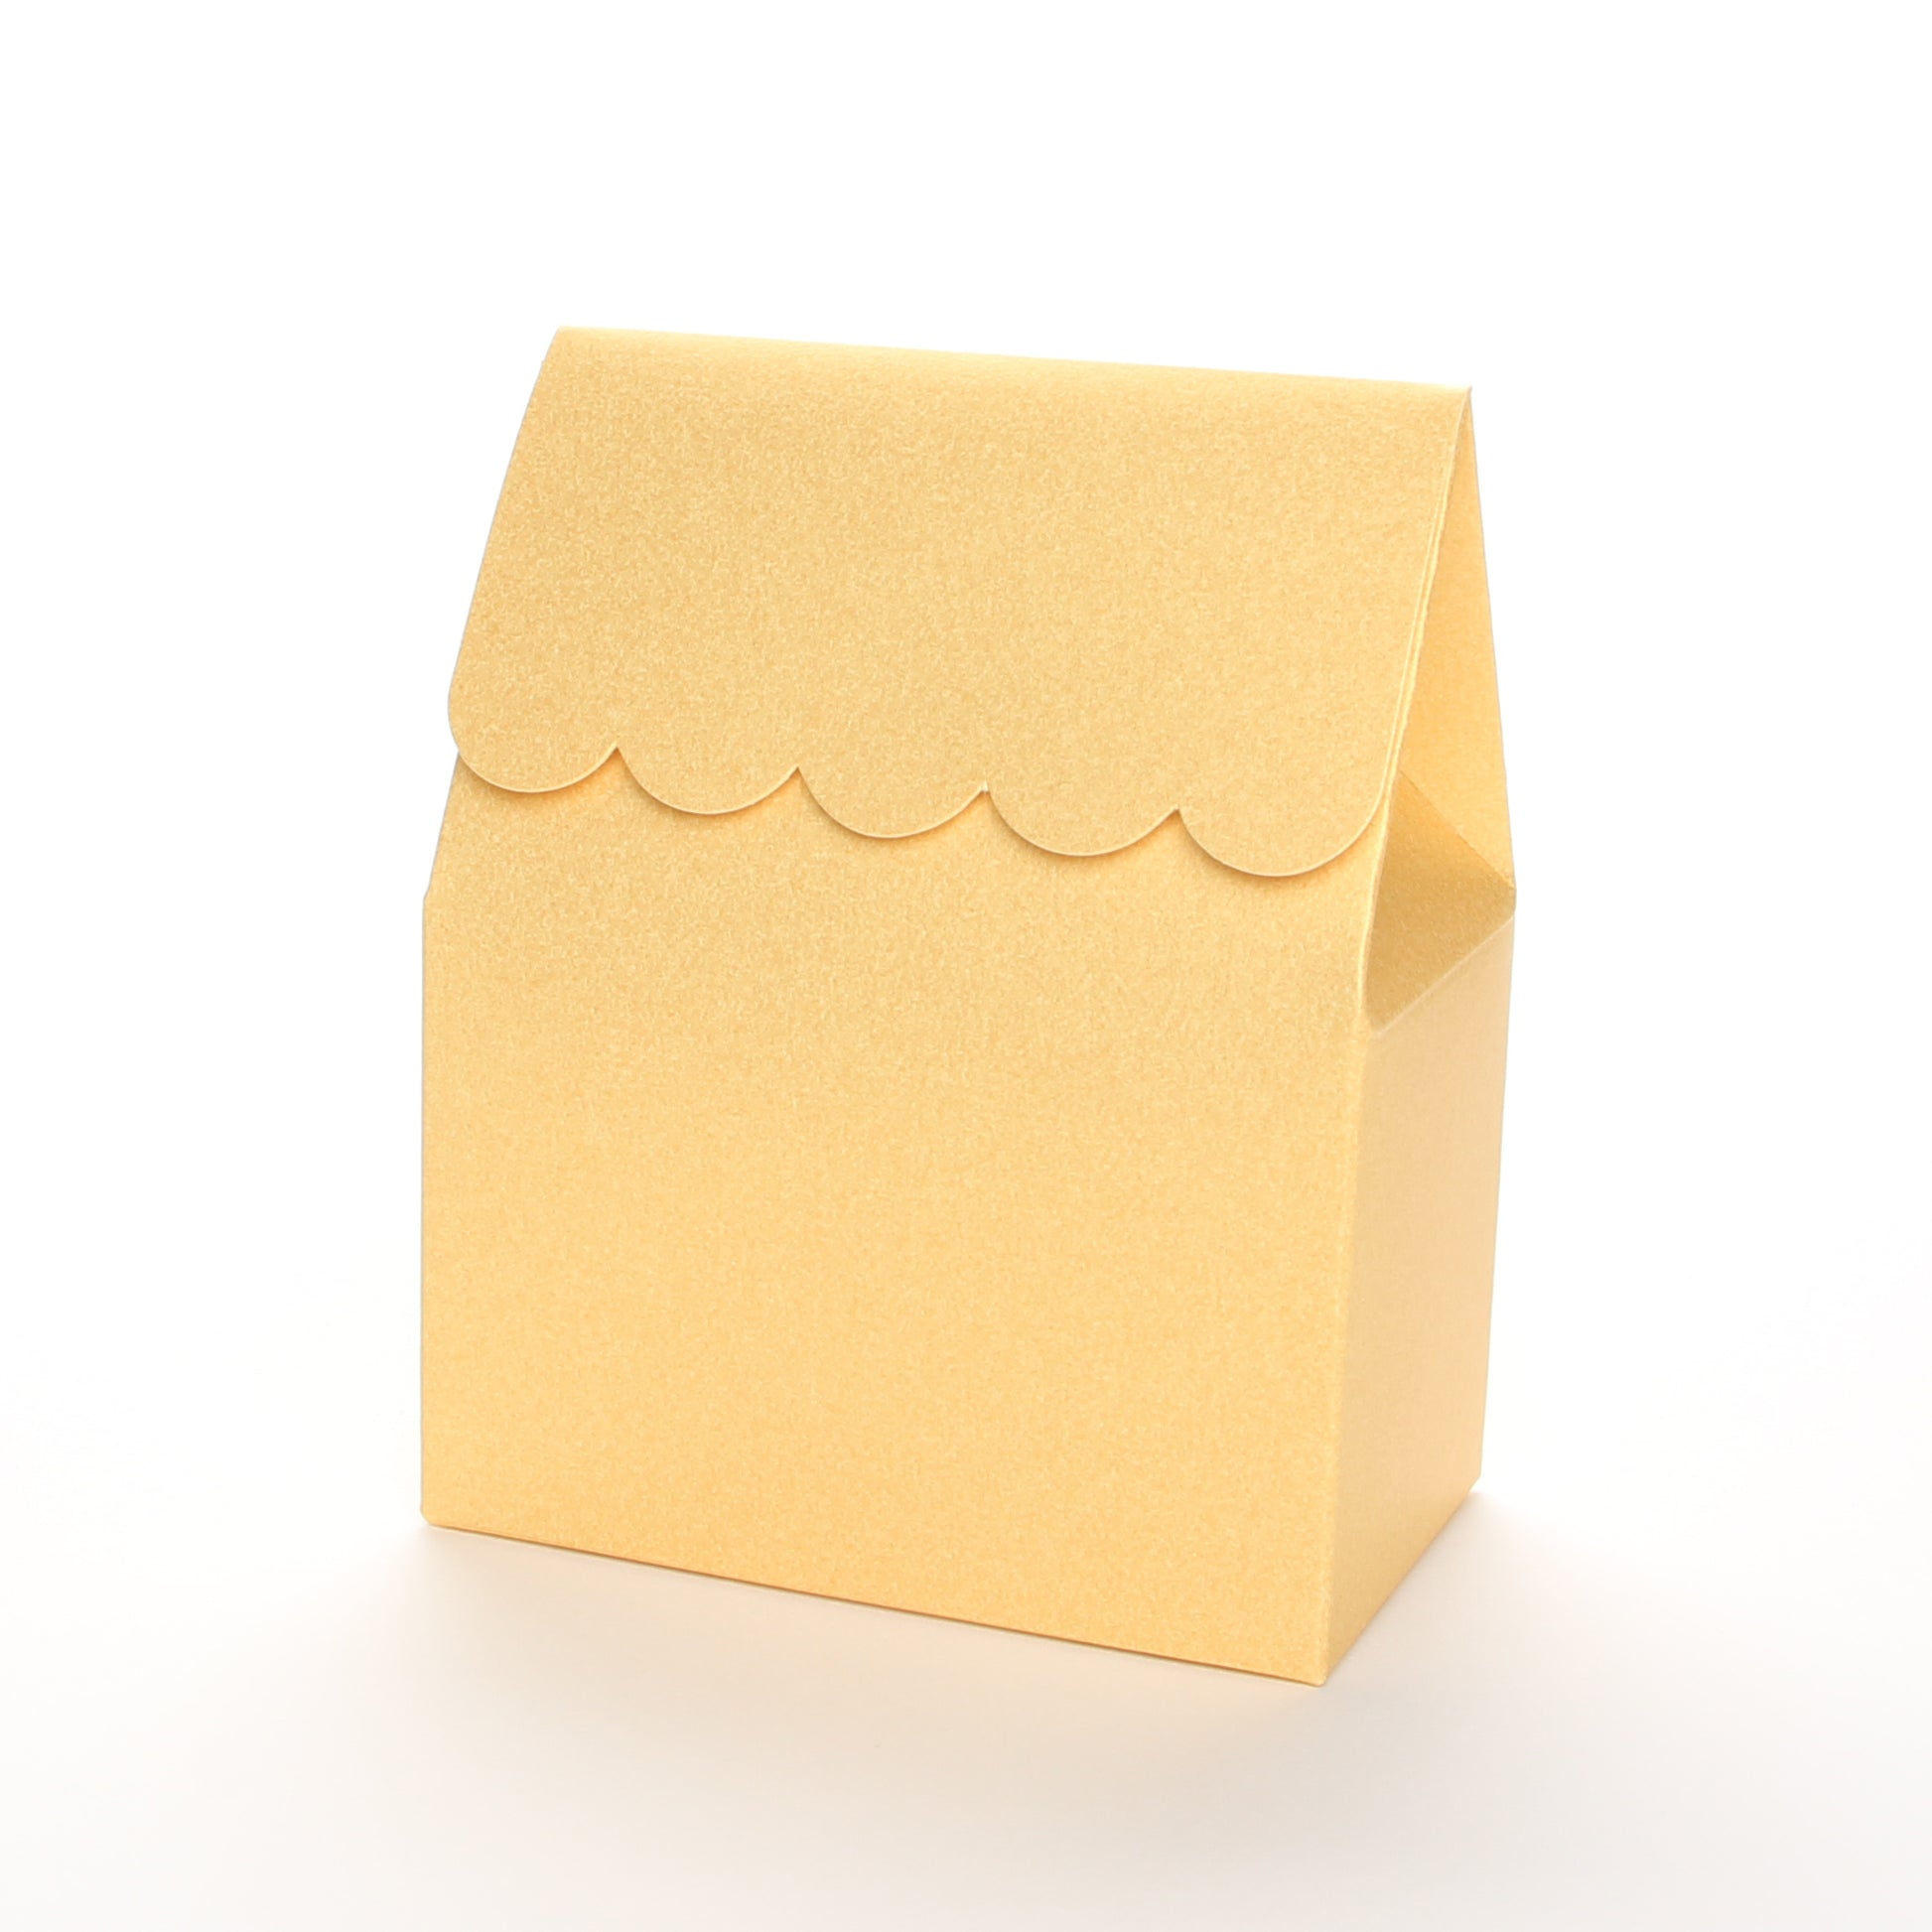 Gold favor box by Lux Party with a scalloped edge on a white background.